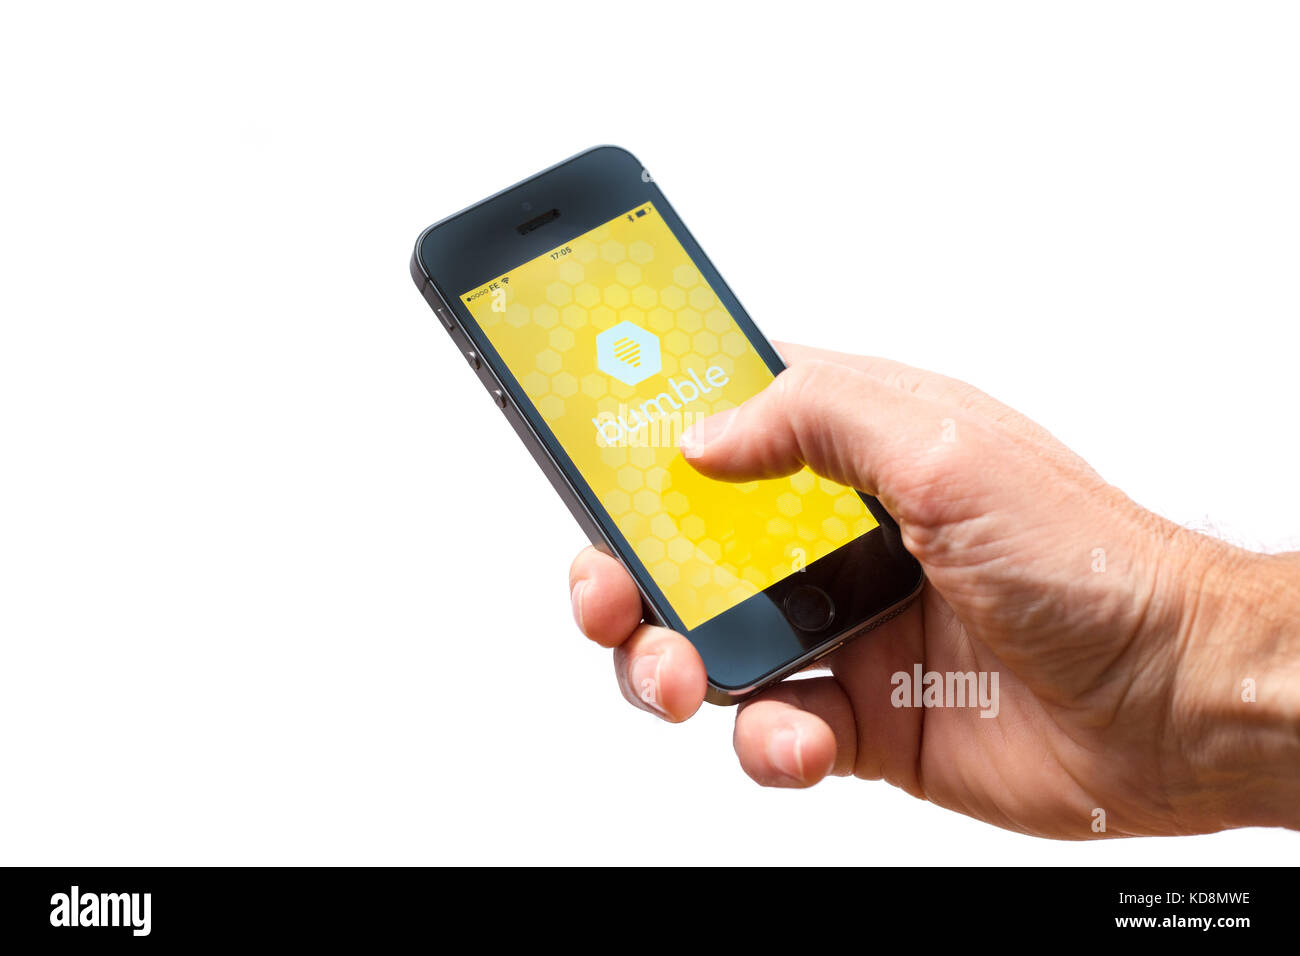 A man using Bumble, a dating app on a mobile phone Stock Photo